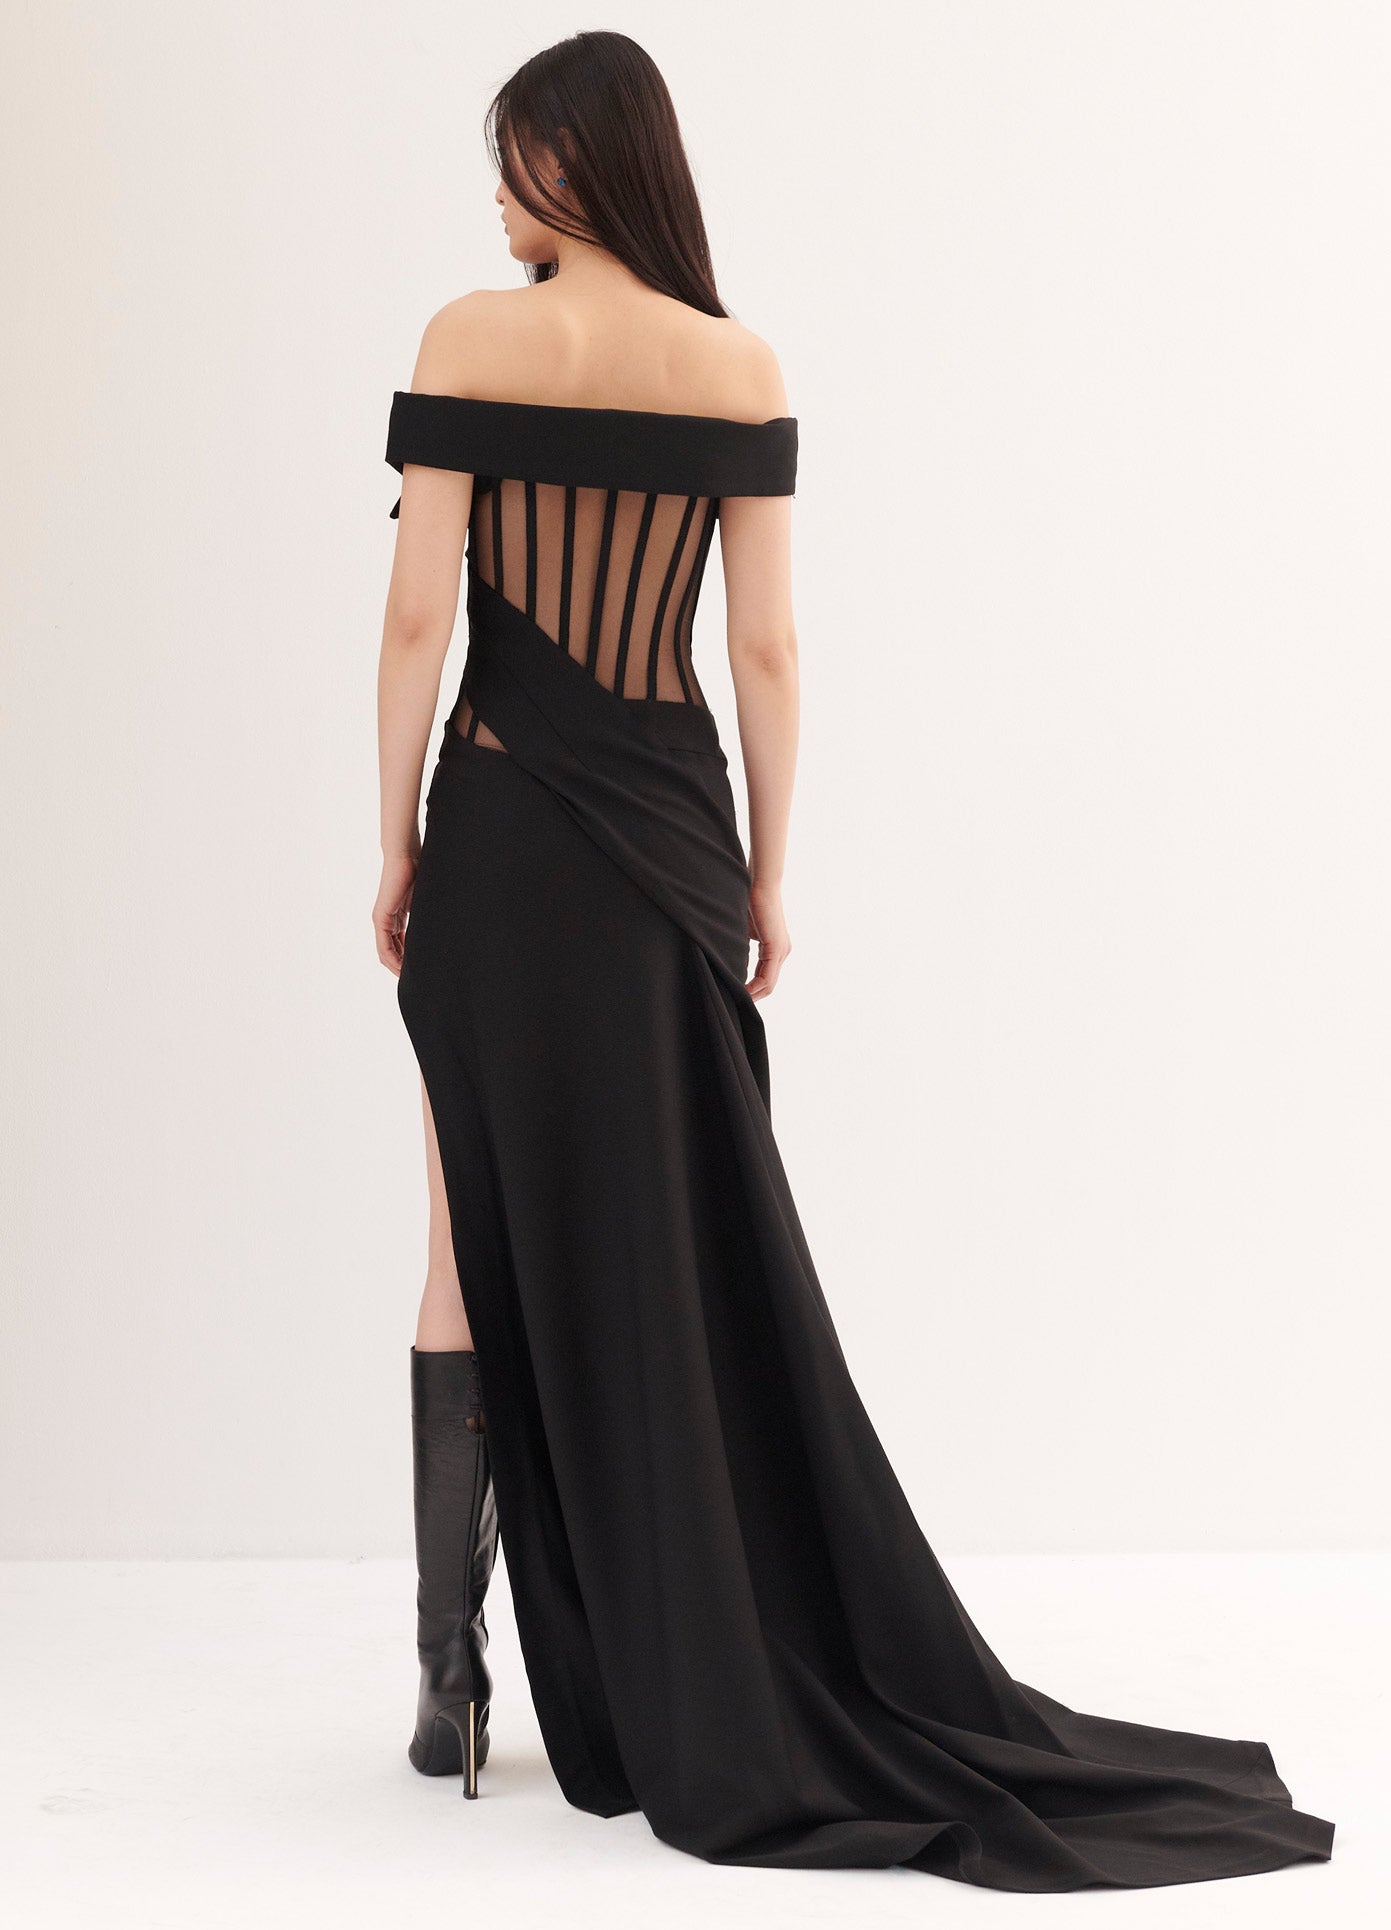 MONSE Off the Shoulder Corset Detail Gown in Black on Model Back View